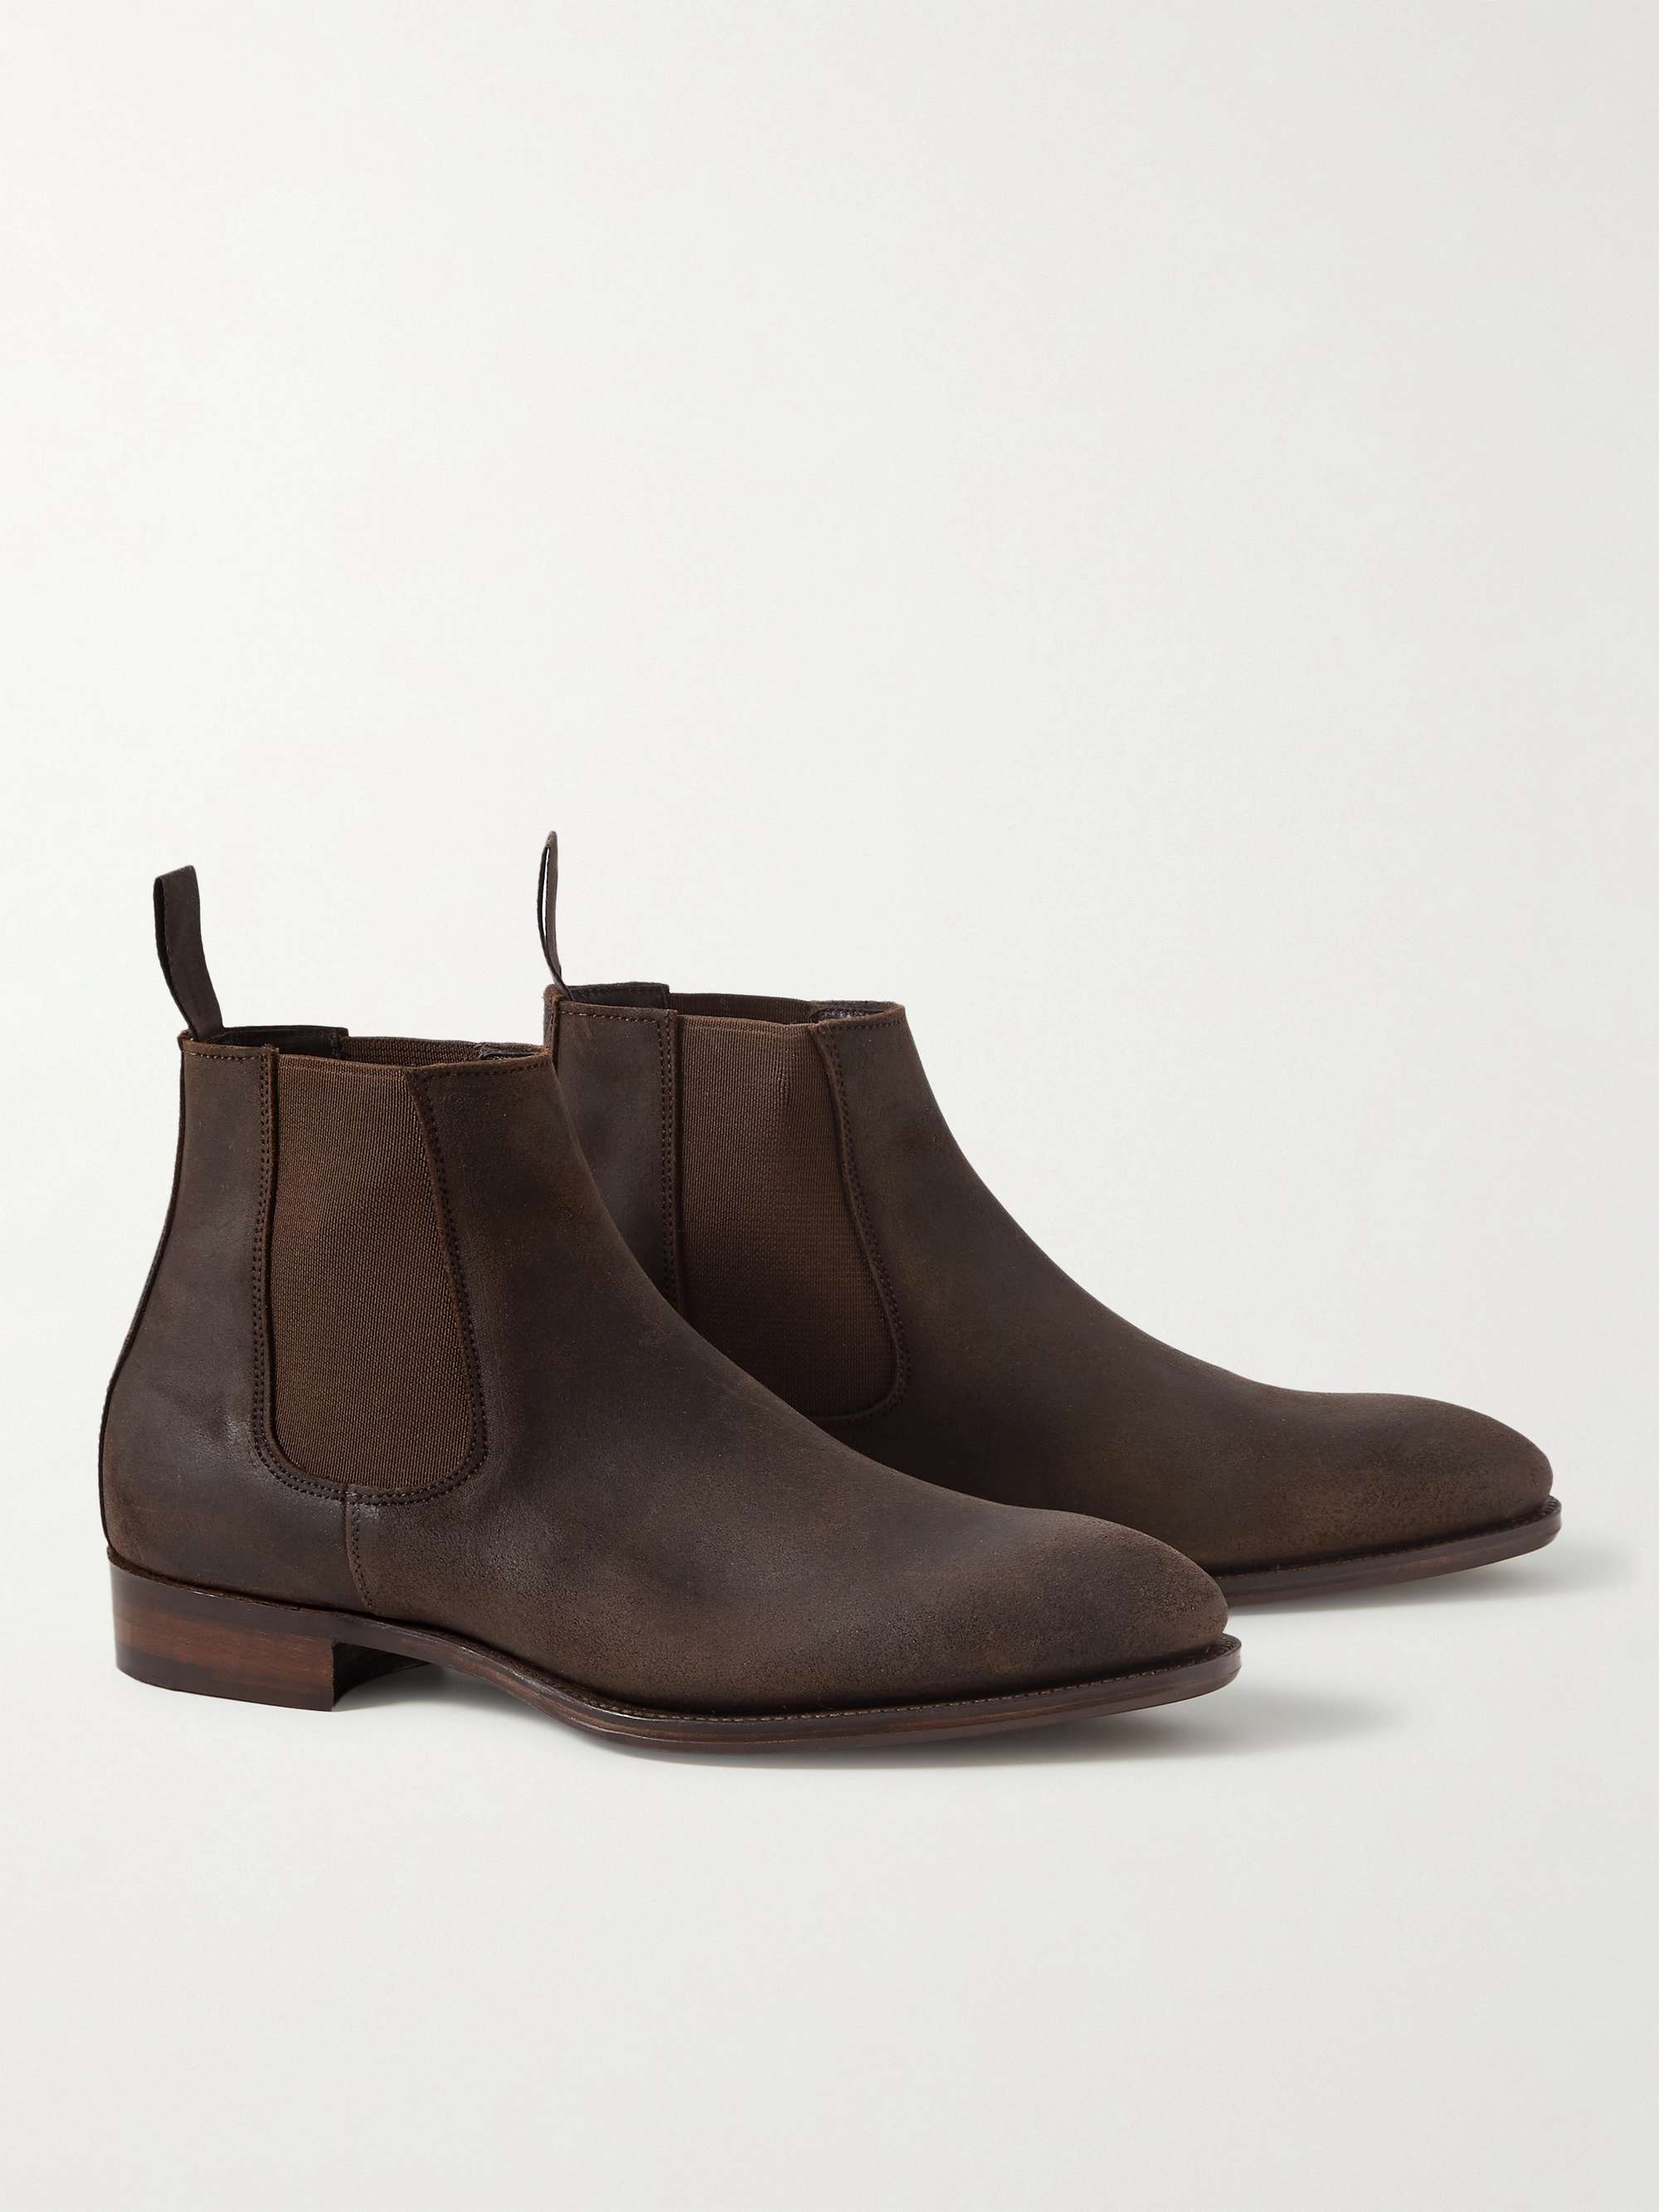 GEORGE CLEVERLEY Jason Roughout Suede Chelsea Boots